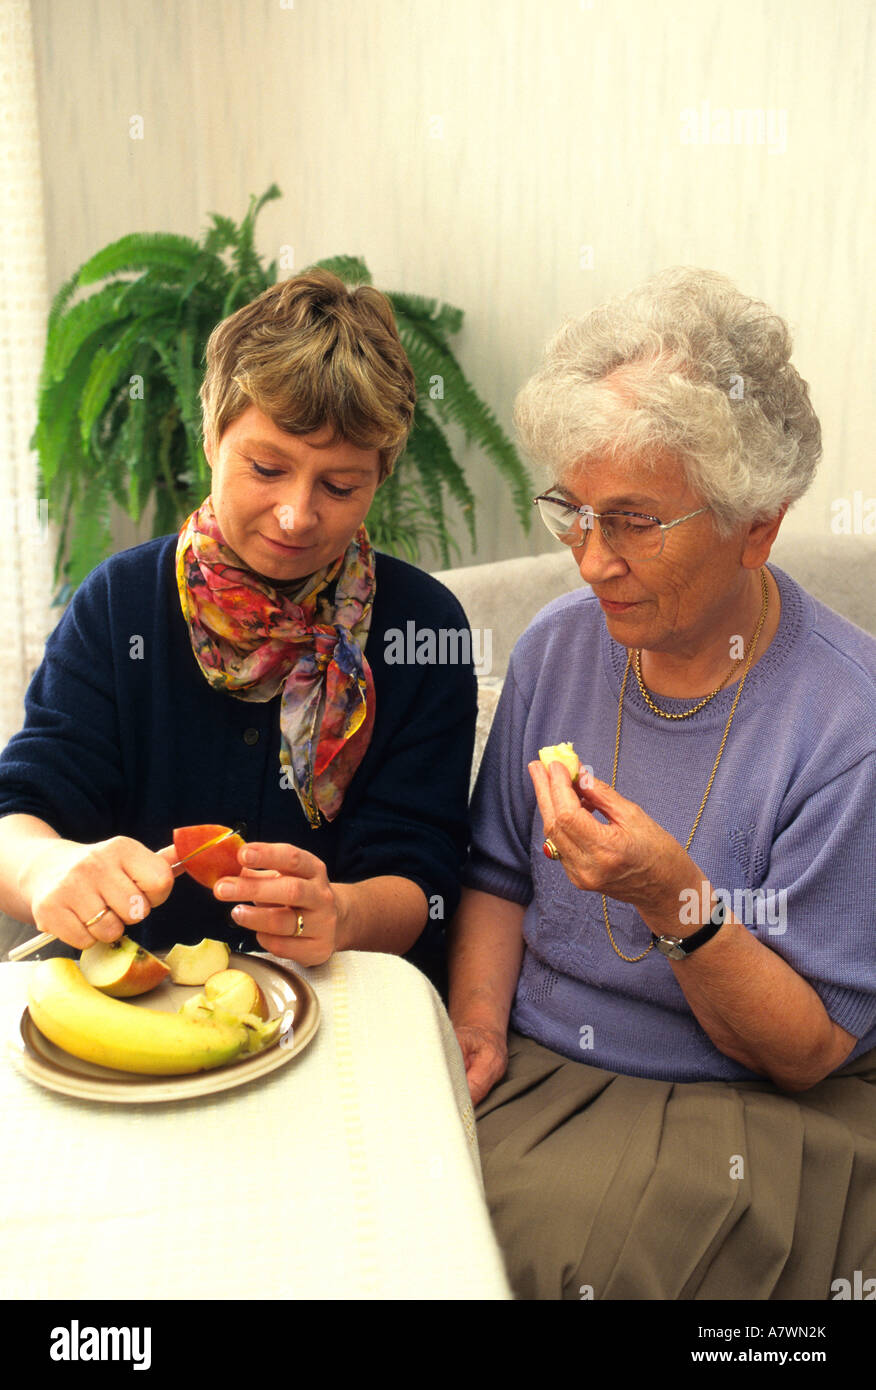 Woman is cutting fruits in small pieces for female senior Stock Photo